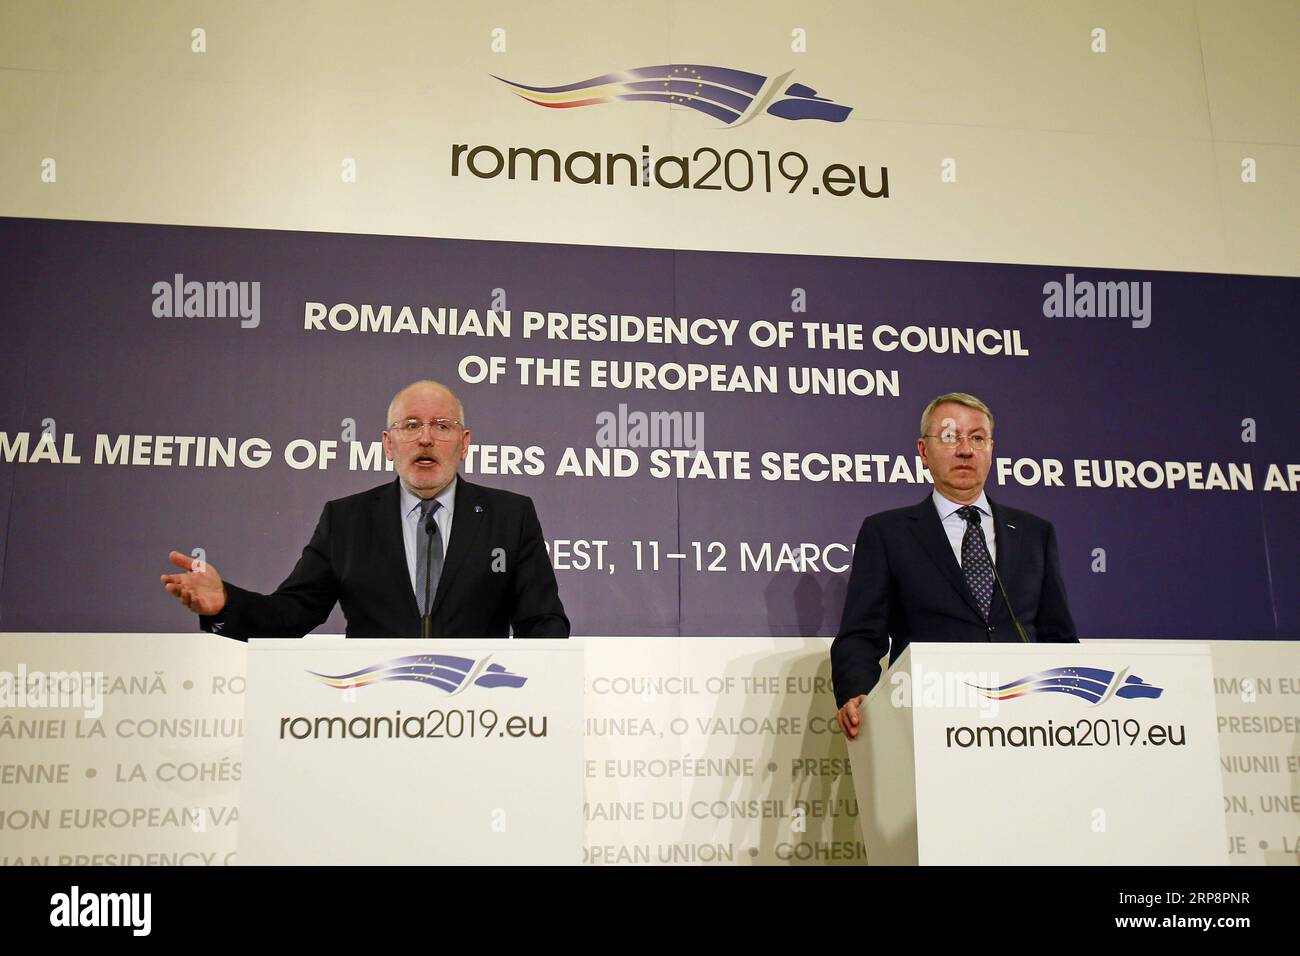 (190313) -- BUCHAREST, March 13, 2019 -- First Vice-President of the European Commission Frans Timmermans (L) attends a joint news conference with the Romanian Minister for European Affairs George Ciamba in Bucharest, Romania, March 12, 2019. The future Multiannual Financial Framework of the European Union (EU) must respond both to the priorities of the EU and to the unexpected new challenges, Timmermans said here on Tuesday. ) ROMANIA-BUCHAREST-EU-BUDGET CristianxCristel PUBLICATIONxNOTxINxCHN Stock Photo